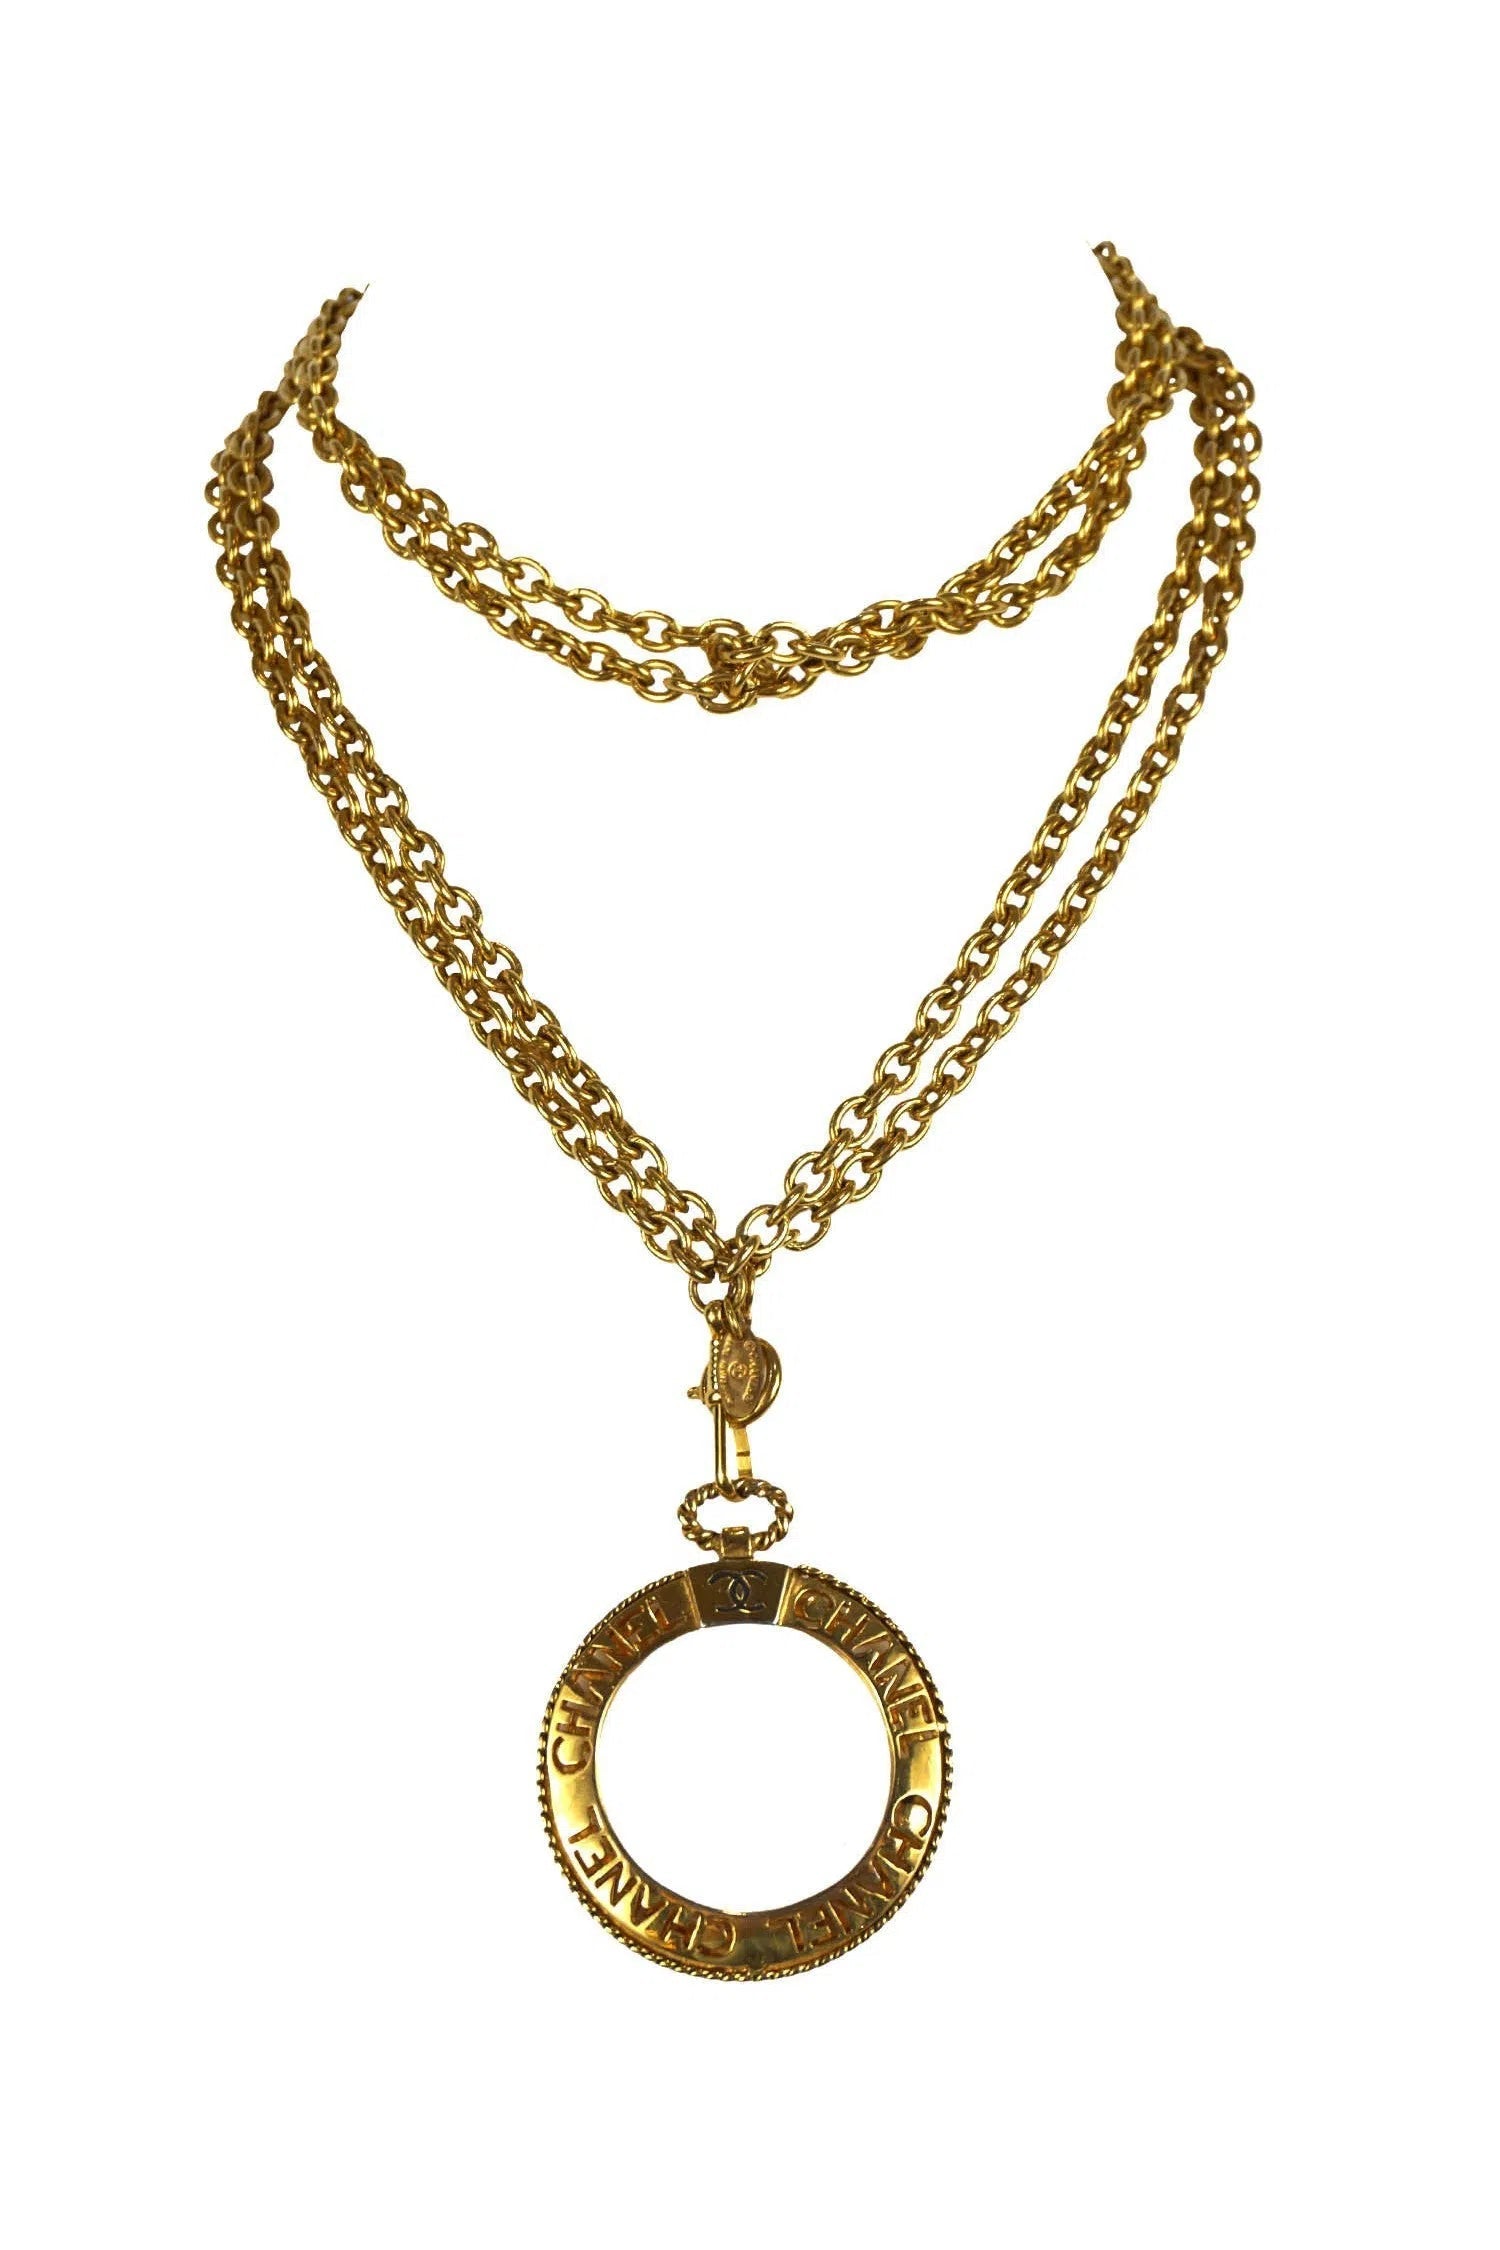 Chanel Vintage 1980's Magnifying Glass Necklace - Foxy Couture Carmel